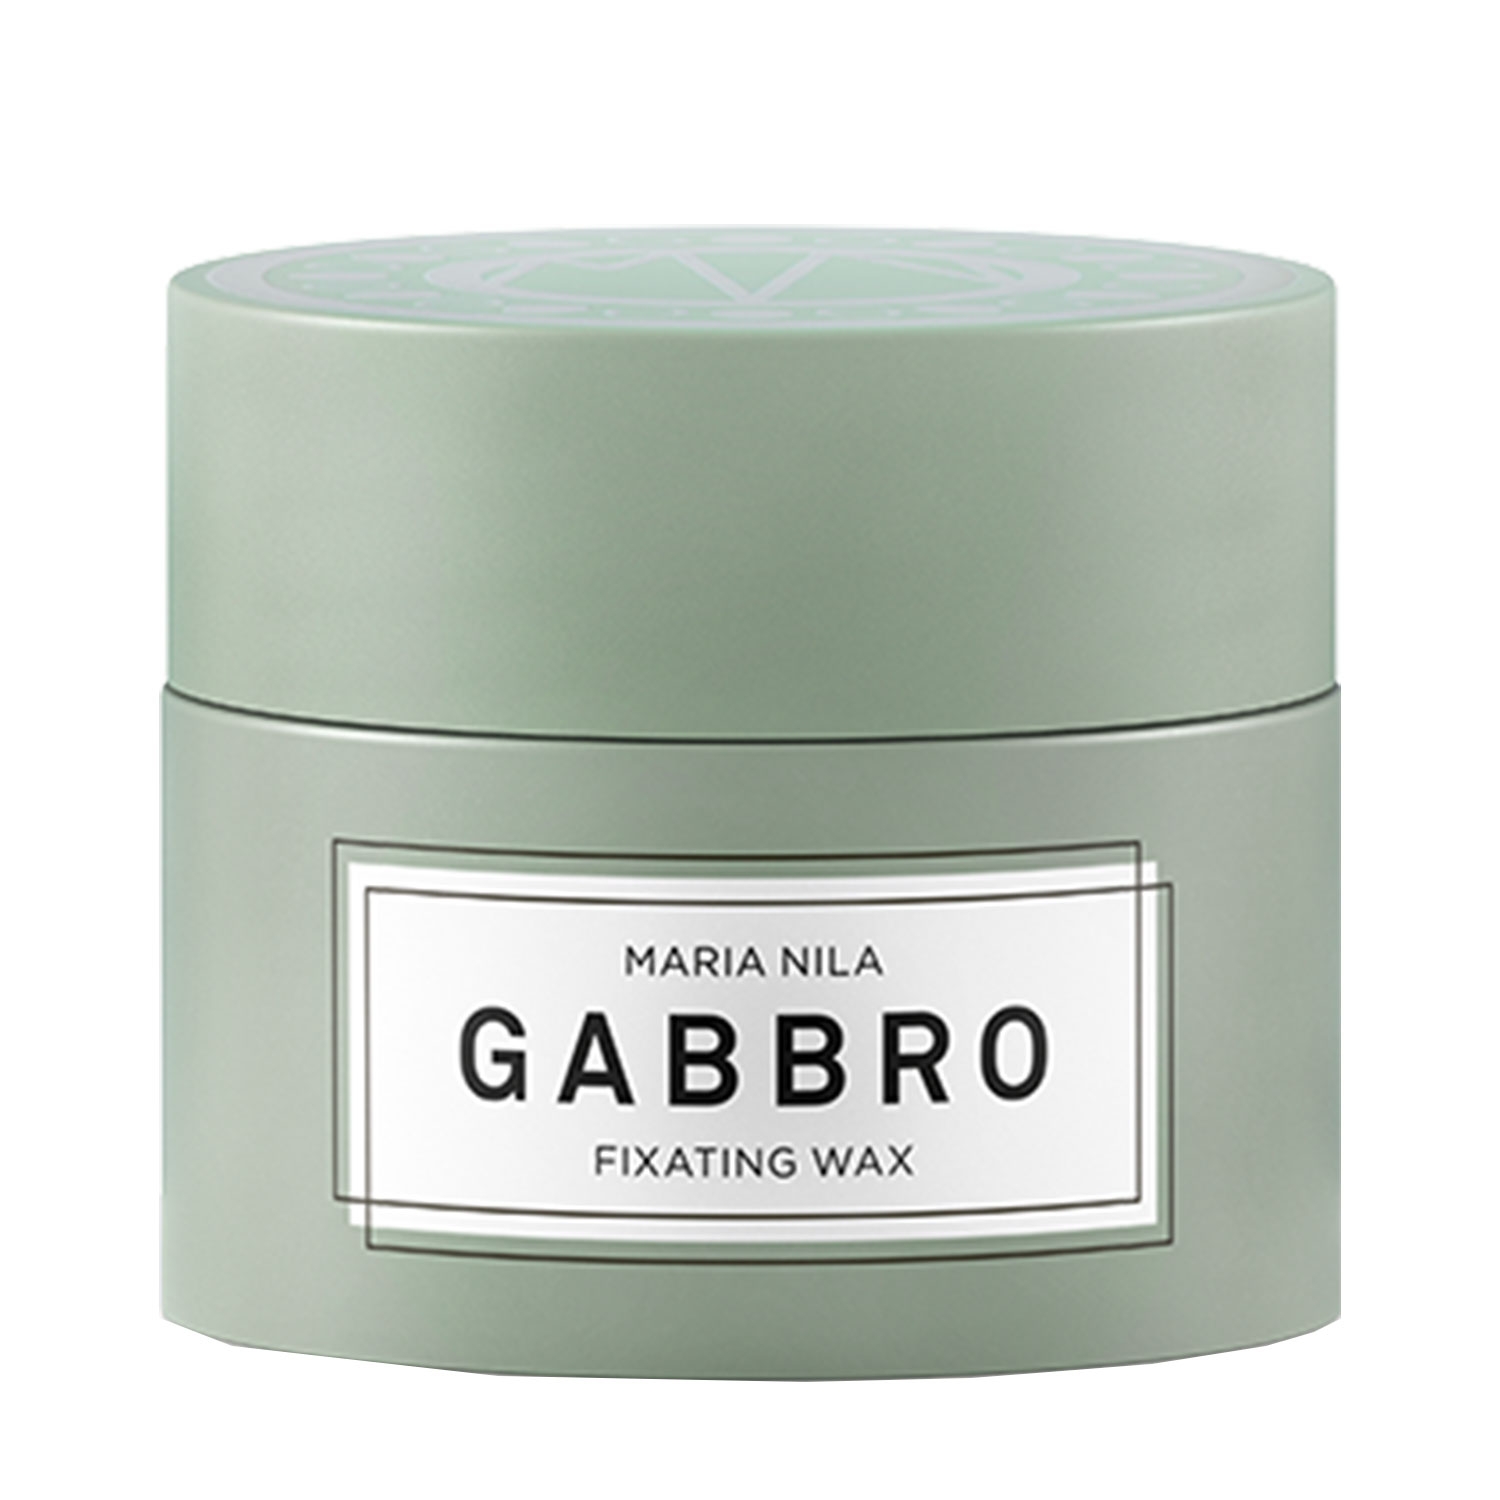 Product image from Minerals - Gabbro Fixating Wax